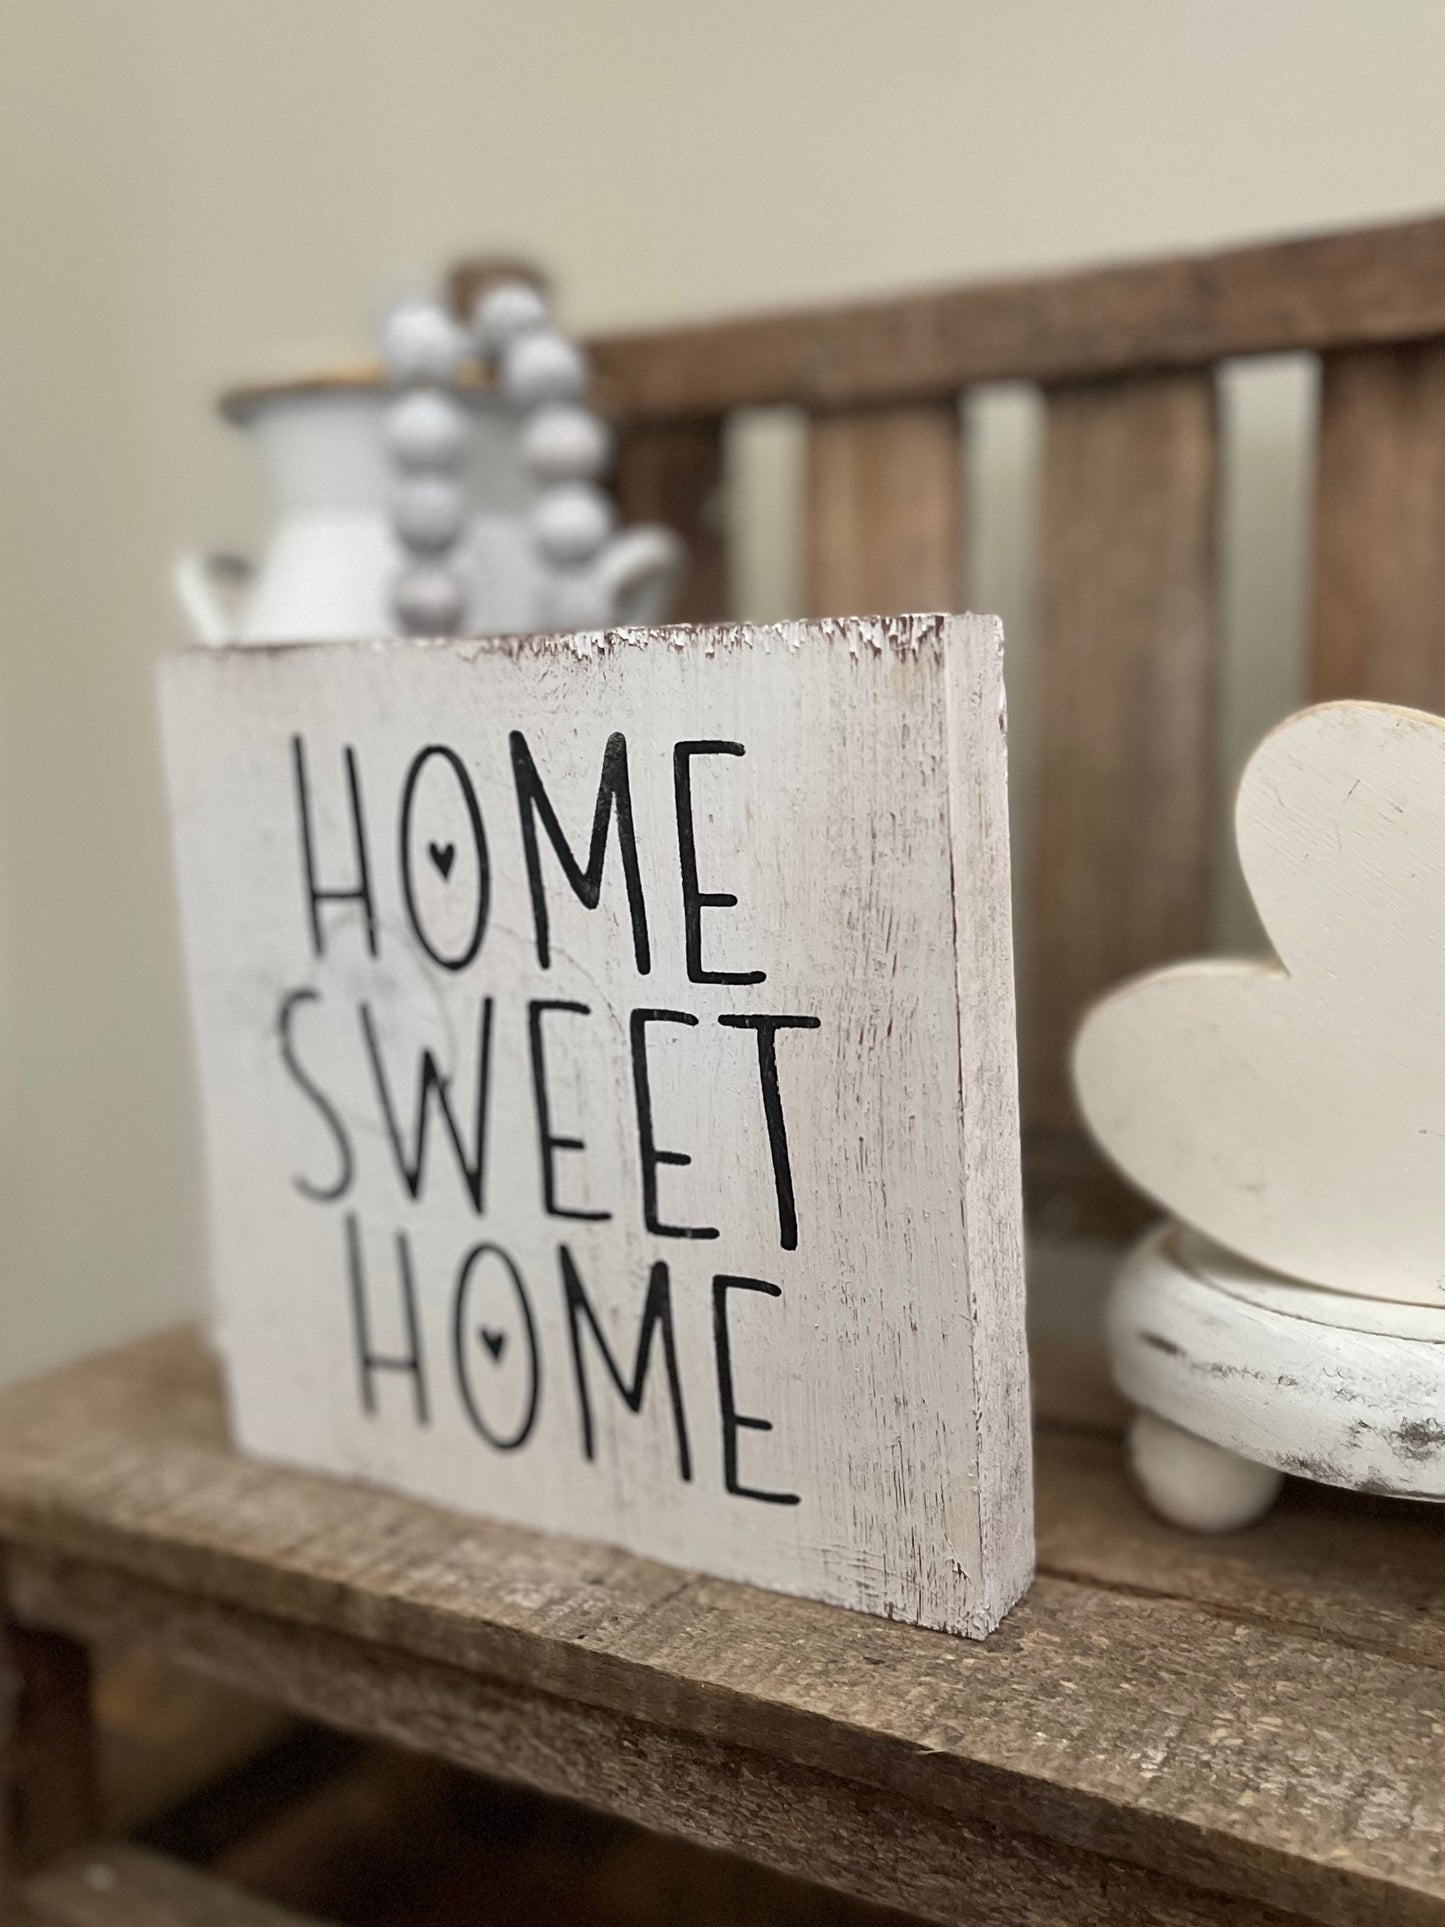 Home sweet home sign